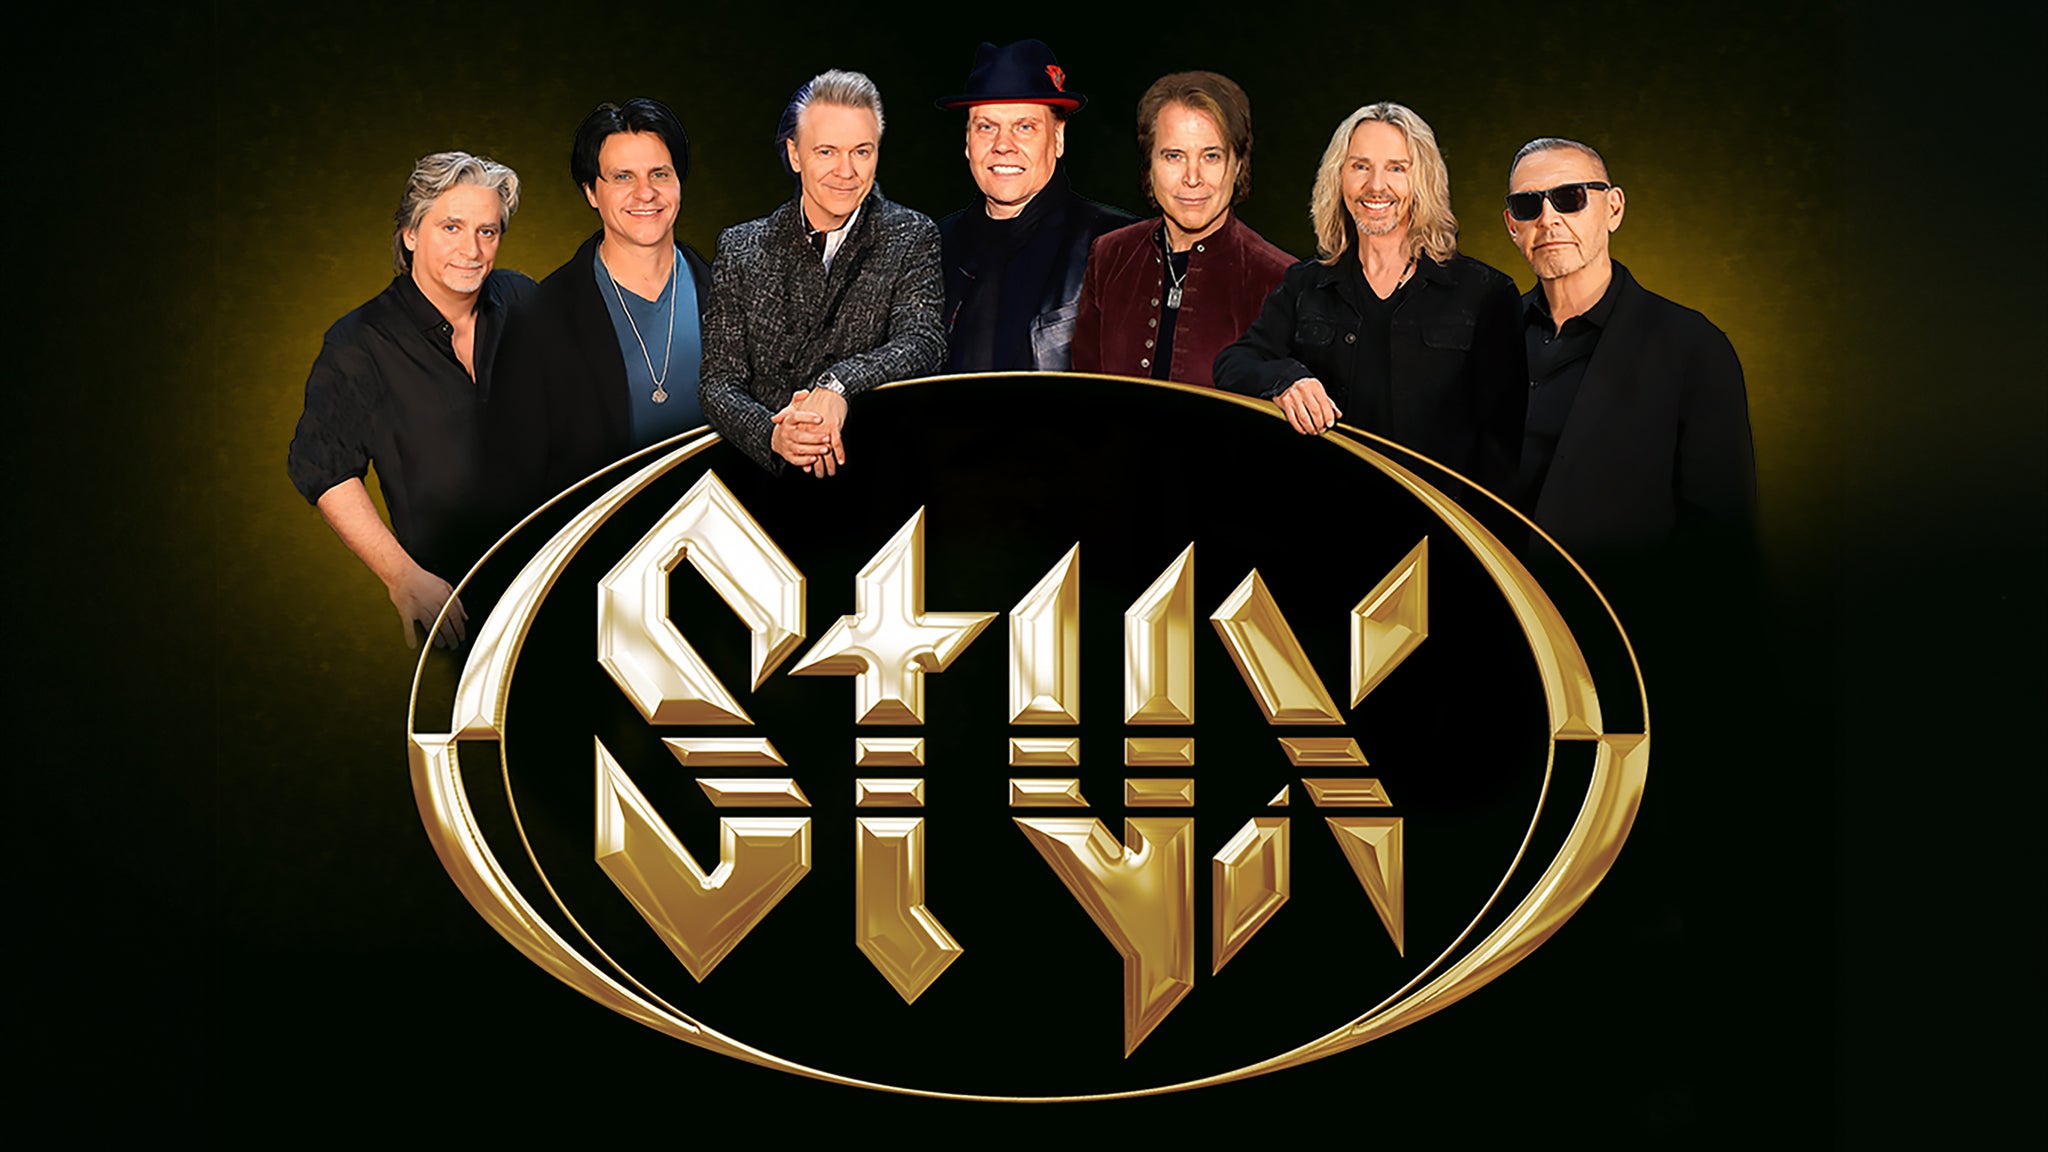 Styx & Foreigner - Renegades and Juke Box Heroes Tour - KSHE Pig Roast